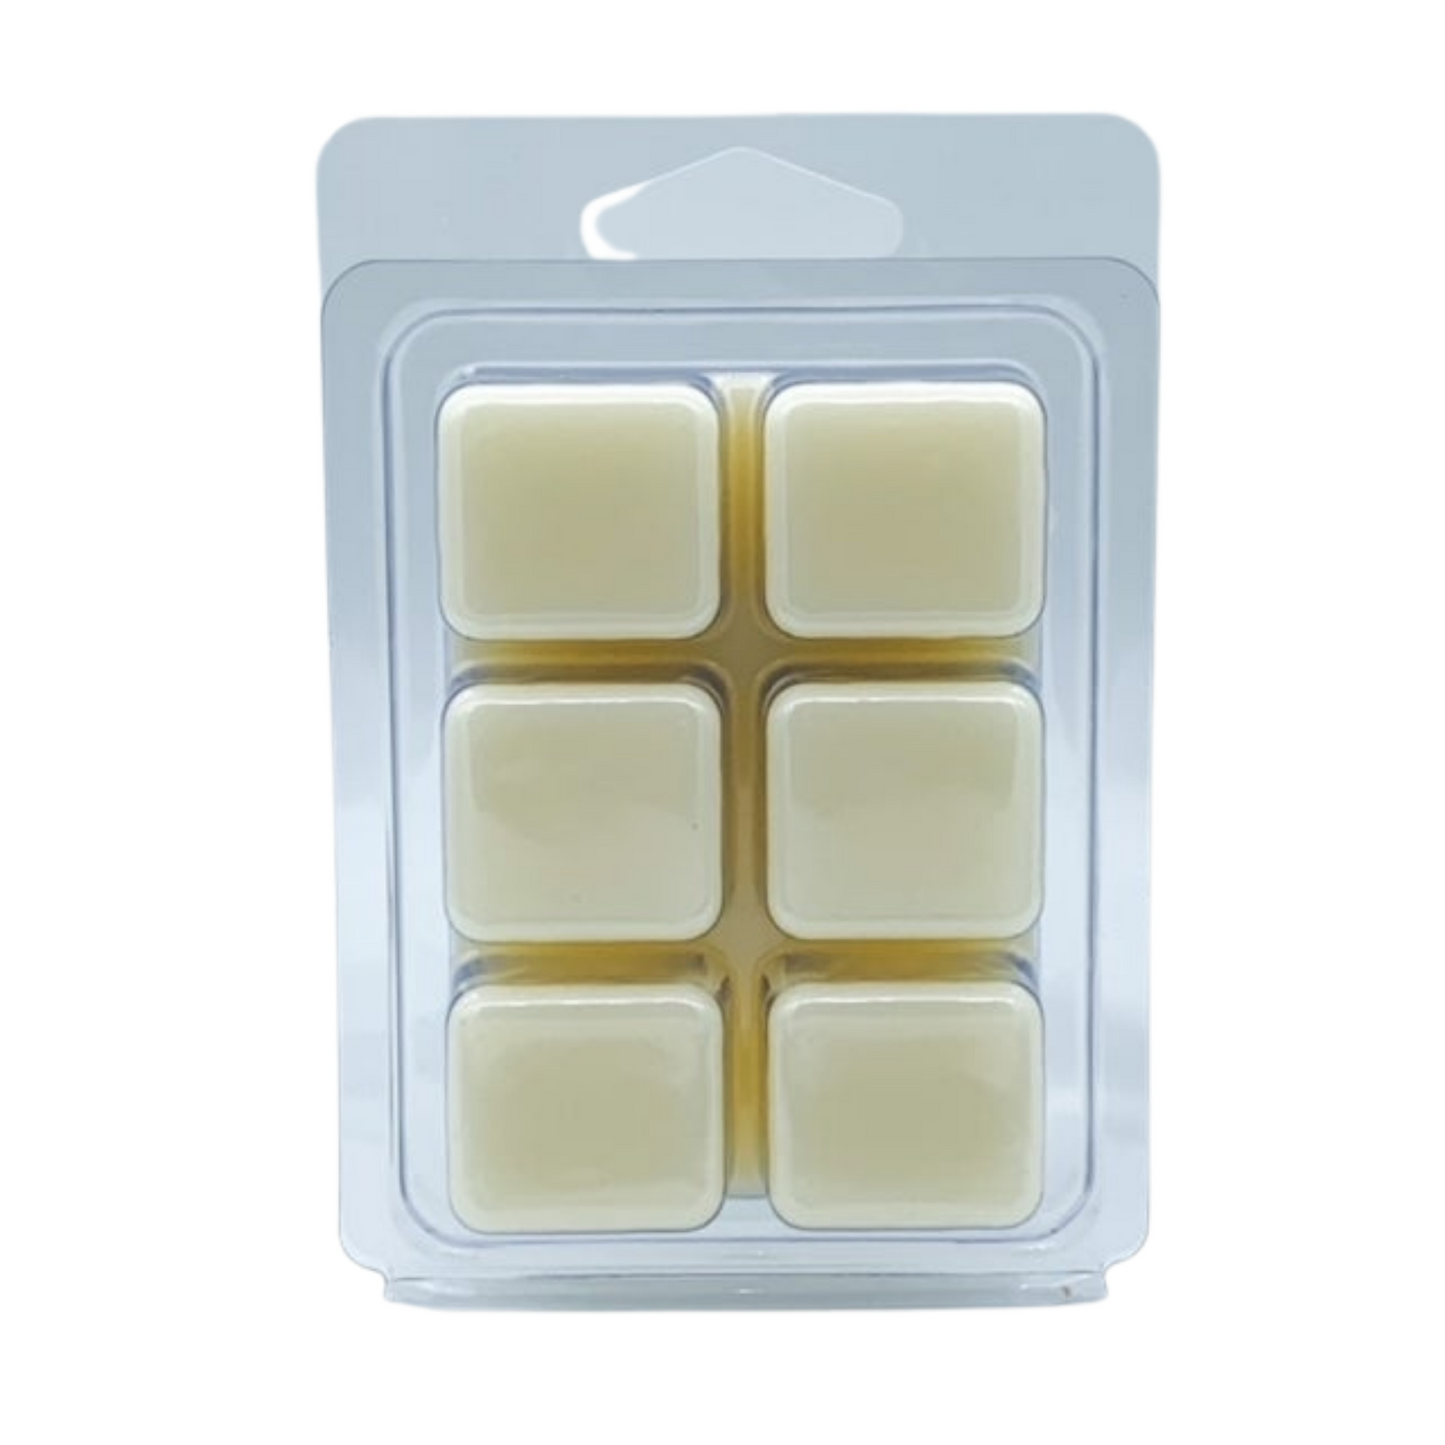 LEMON BLOSSOM | Scented Soy Wax Melts